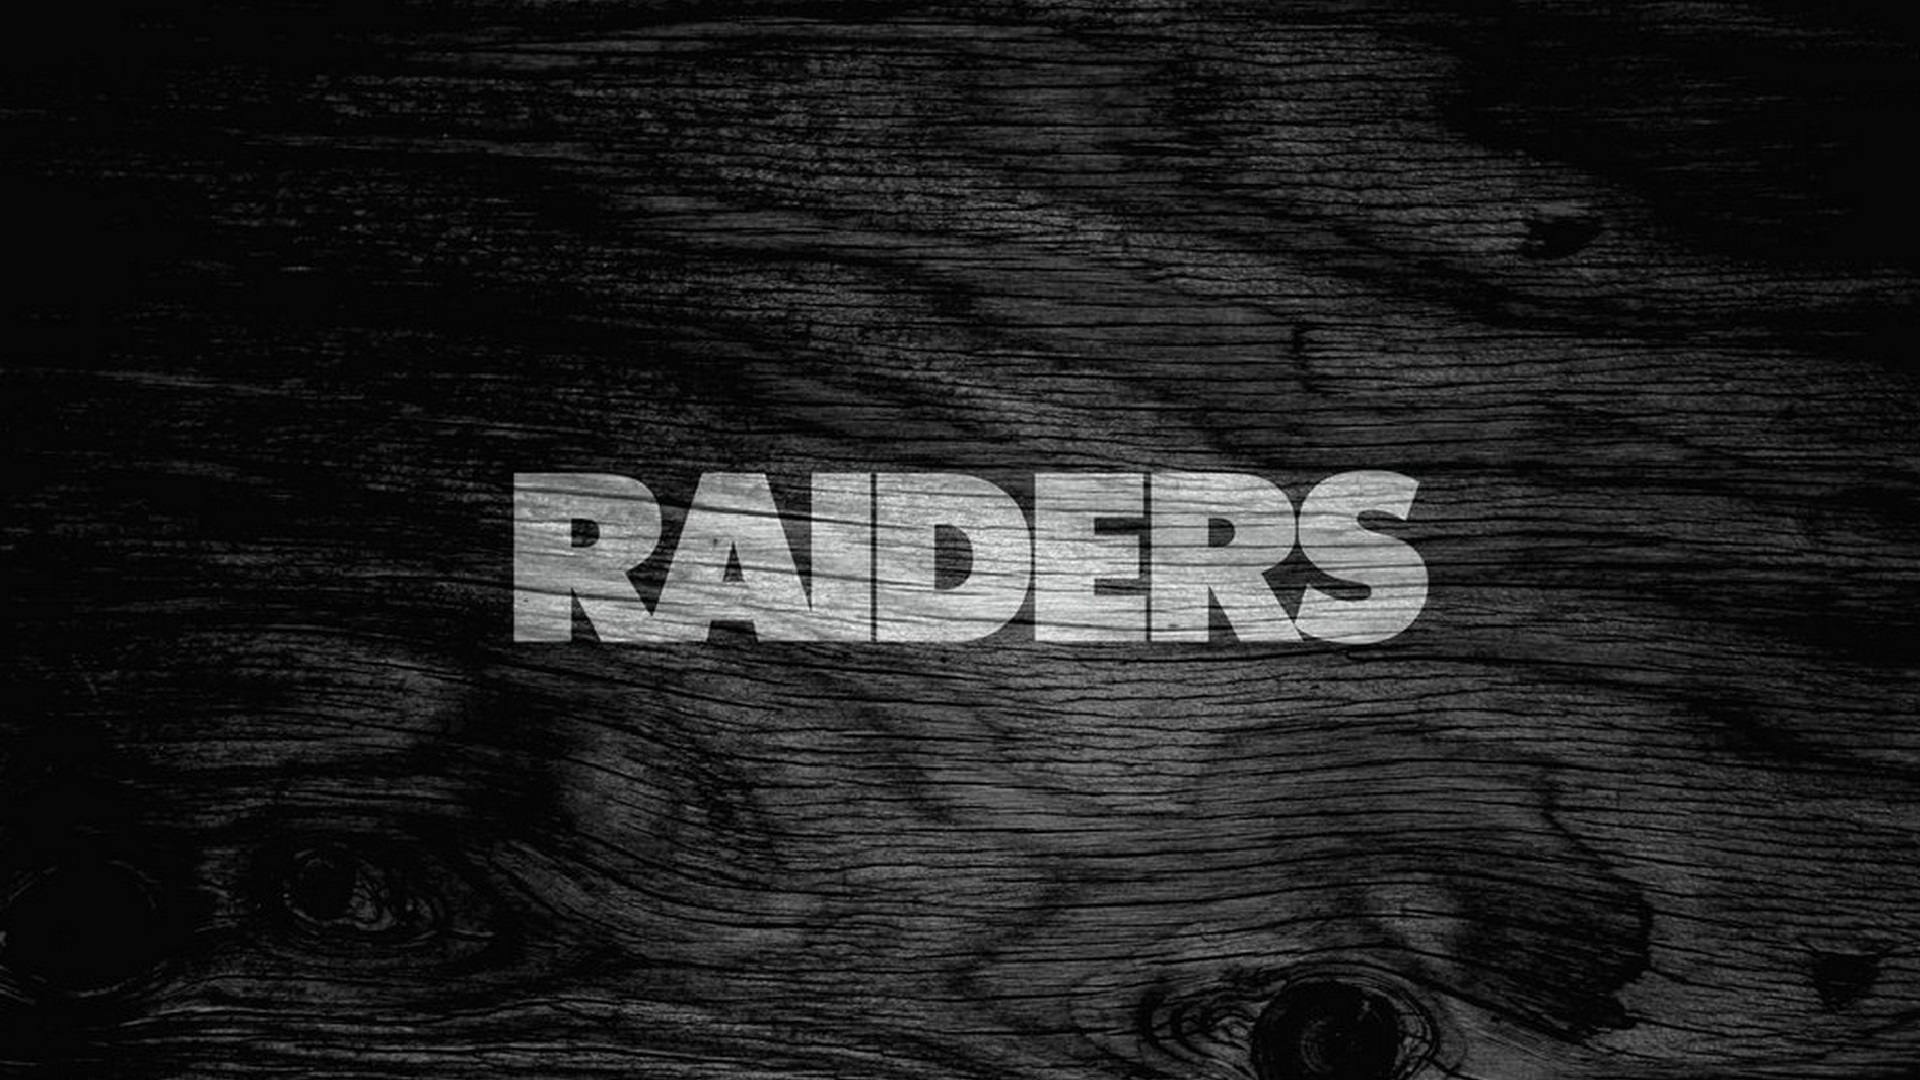 Wallpapers Oakland Raiders | 2020 NFL